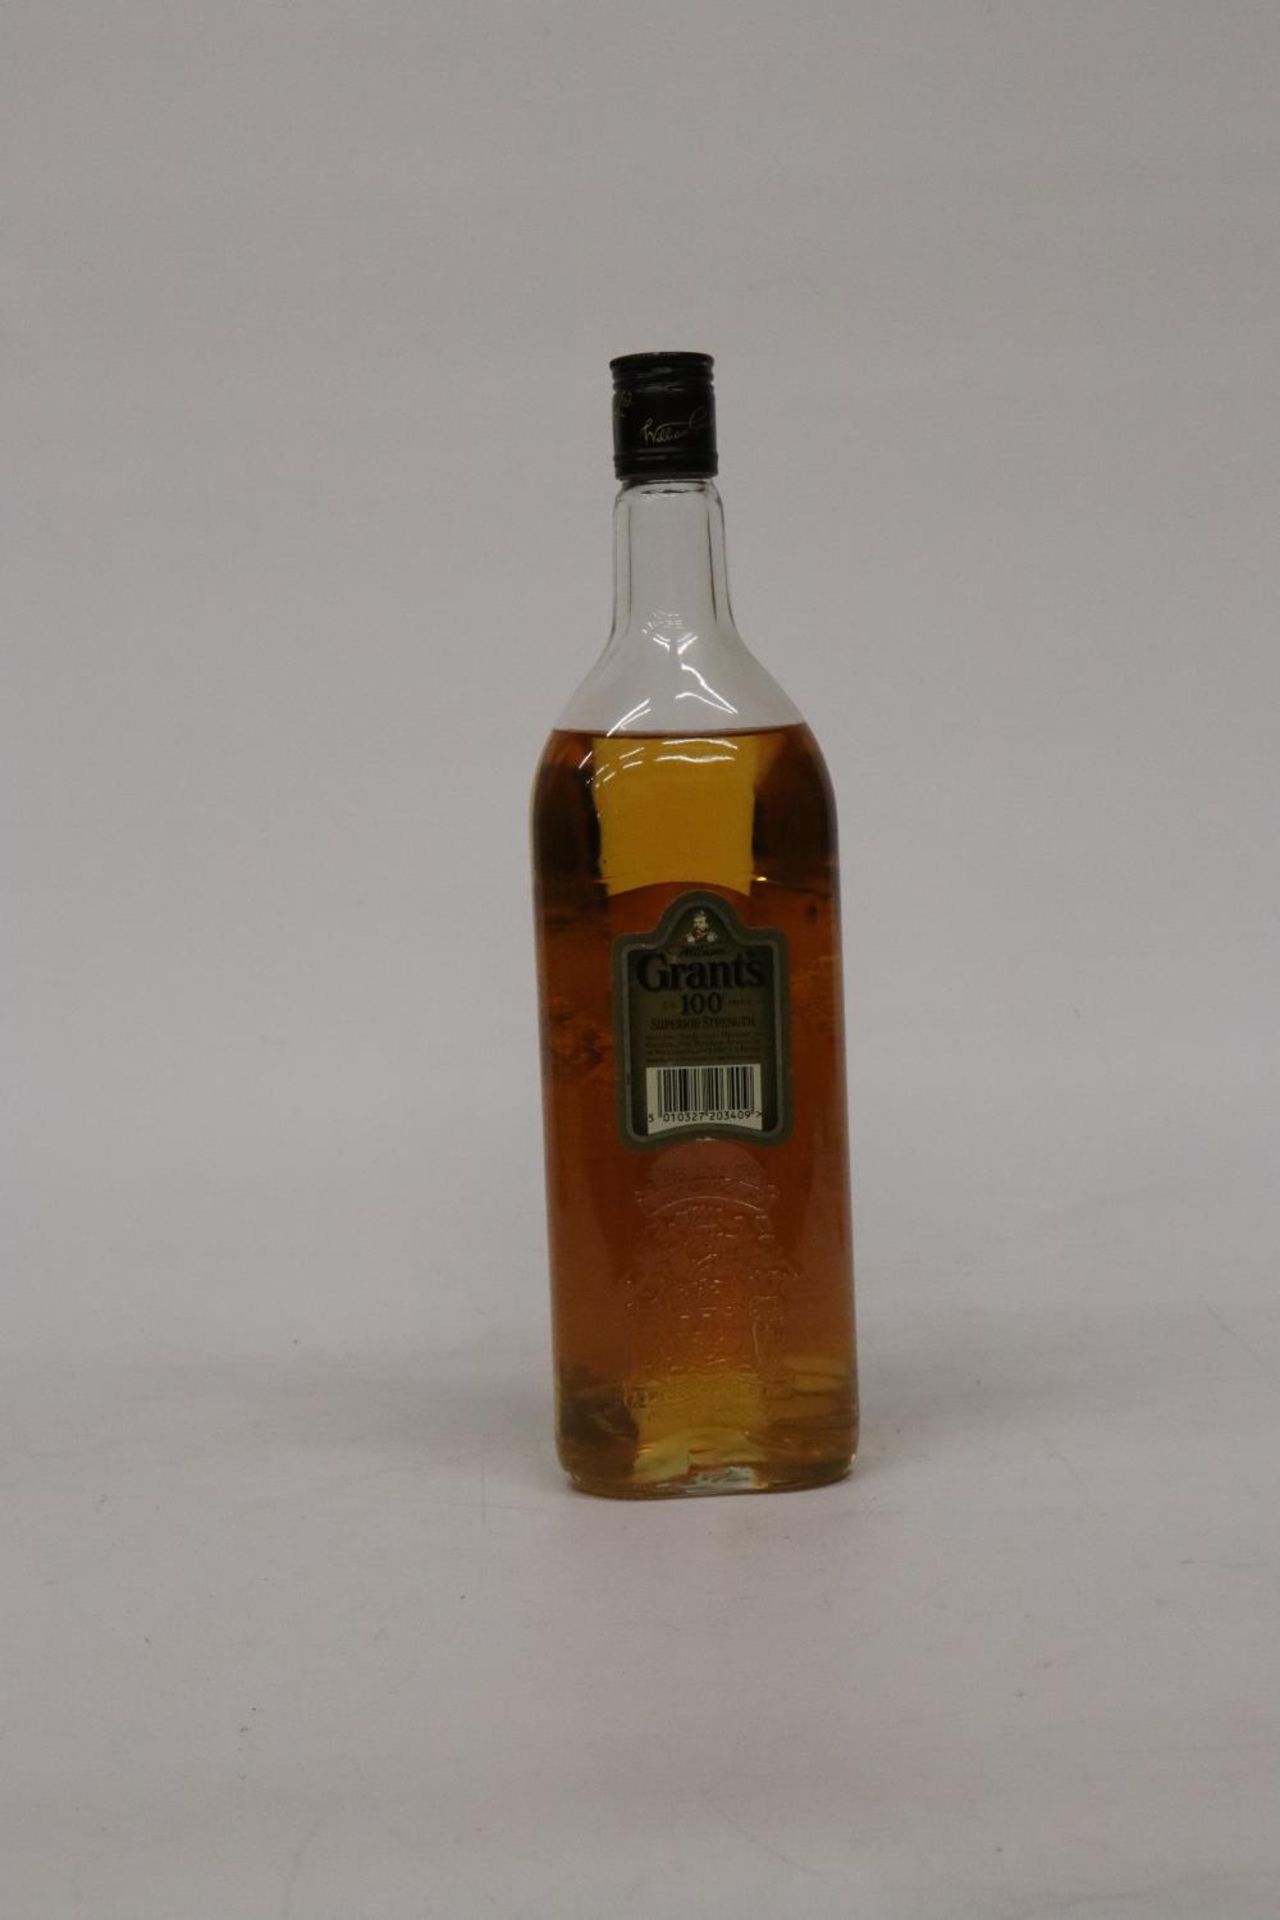 A 1L BOTTLE OF GRANTS 100 PROOF SUPERIOR STRENGTH SCOTCH WHISKY - Image 2 of 4